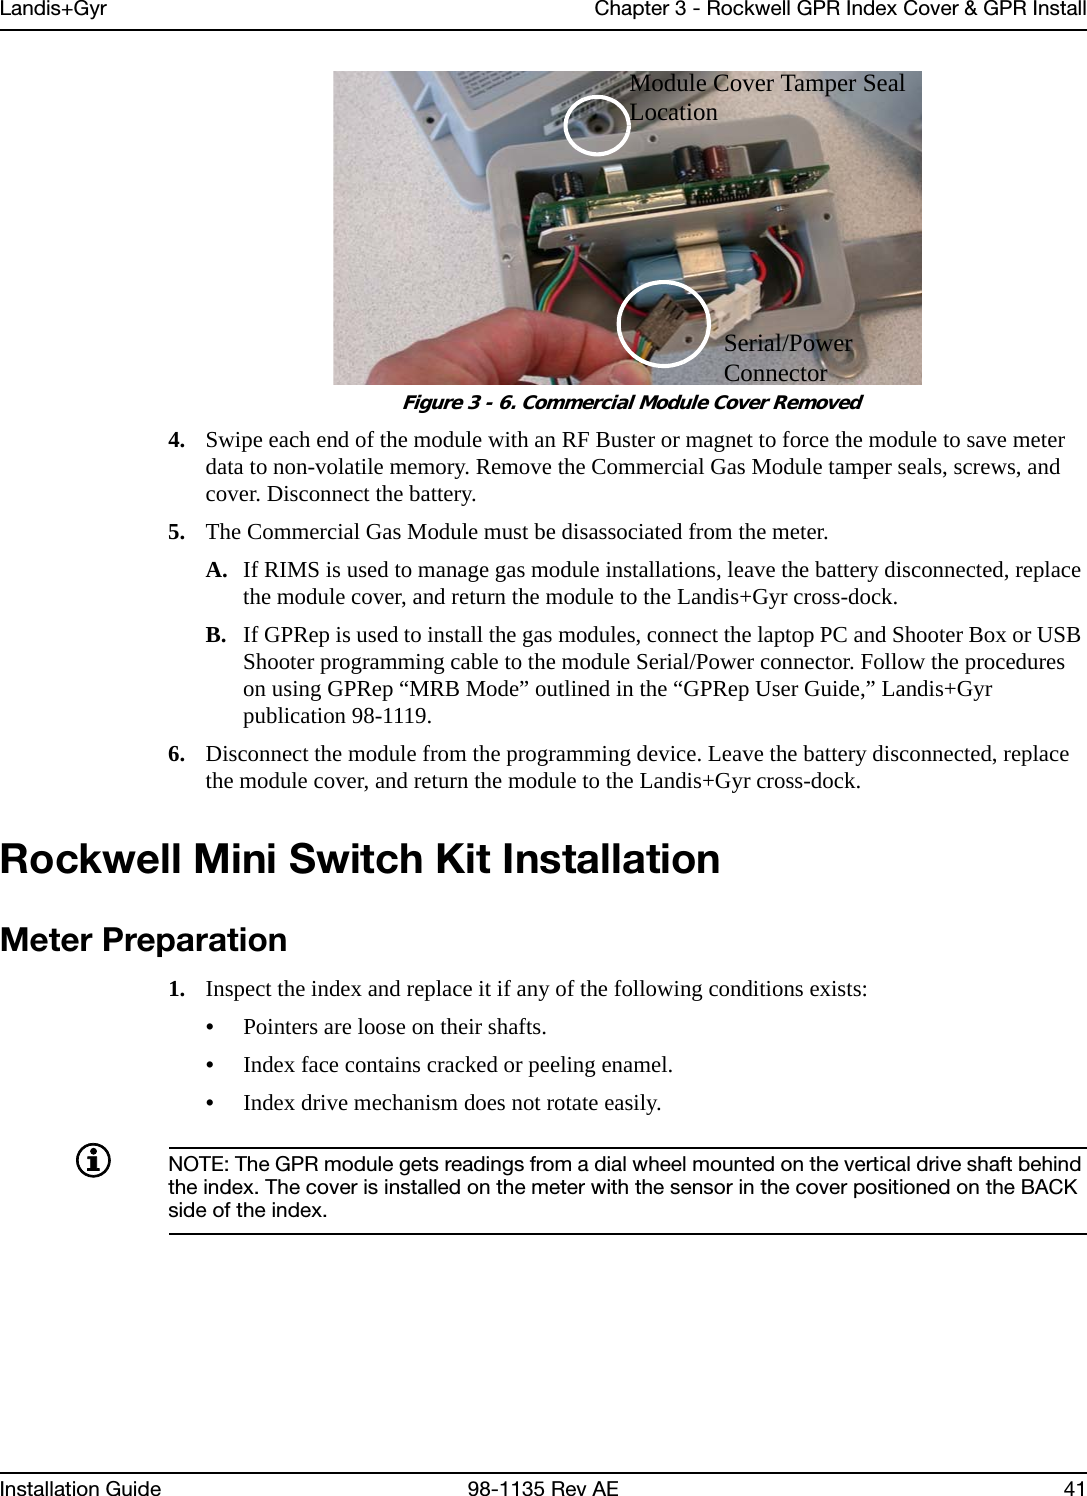 Landis+Gyr Chapter 3 - Rockwell GPR Index Cover &amp; GPR InstallInstallation Guide 98-1135 Rev AE 41 Figure 3 - 6. Commercial Module Cover Removed4. Swipe each end of the module with an RF Buster or magnet to force the module to save meter data to non-volatile memory. Remove the Commercial Gas Module tamper seals, screws, and cover. Disconnect the battery.5. The Commercial Gas Module must be disassociated from the meter.A. If RIMS is used to manage gas module installations, leave the battery disconnected, replace the module cover, and return the module to the Landis+Gyr cross-dock.B. If GPRep is used to install the gas modules, connect the laptop PC and Shooter Box or USB Shooter programming cable to the module Serial/Power connector. Follow the procedures on using GPRep “MRB Mode” outlined in the “GPRep User Guide,” Landis+Gyr publication 98-1119.6. Disconnect the module from the programming device. Leave the battery disconnected, replace the module cover, and return the module to the Landis+Gyr cross-dock.Rockwell Mini Switch Kit InstallationMeter Preparation1. Inspect the index and replace it if any of the following conditions exists:•Pointers are loose on their shafts.•Index face contains cracked or peeling enamel.•Index drive mechanism does not rotate easily.NOTE: The GPR module gets readings from a dial wheel mounted on the vertical drive shaft behind the index. The cover is installed on the meter with the sensor in the cover positioned on the BACK side of the index.Module Cover Tamper Seal LocationSerial/Power Connector